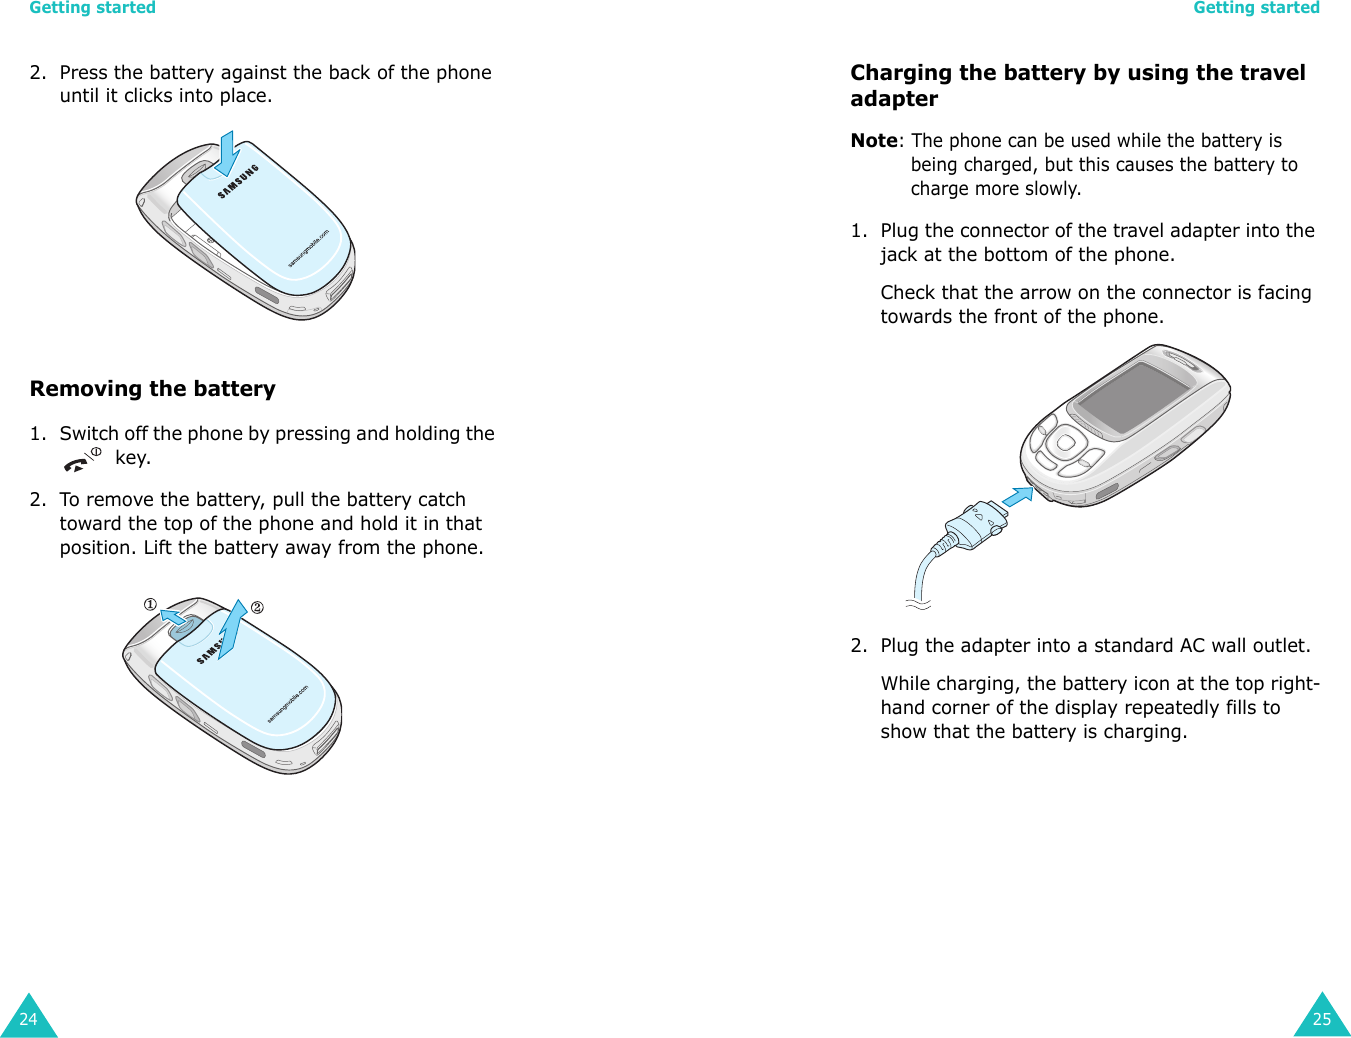 Getting started242. Press the battery against the back of the phone until it clicks into place. Removing the battery1. Switch off the phone by pressing and holding the  key.2. To remove the battery, pull the battery catch toward the top of the phone and hold it in that position. Lift the battery away from the phone.Getting started25Charging the battery by using the travel adapterNote: The phone can be used while the battery is being charged, but this causes the battery to charge more slowly.1. Plug the connector of the travel adapter into the jack at the bottom of the phone. Check that the arrow on the connector is facing towards the front of the phone.2. Plug the adapter into a standard AC wall outlet.While charging, the battery icon at the top right-hand corner of the display repeatedly fills to show that the battery is charging.